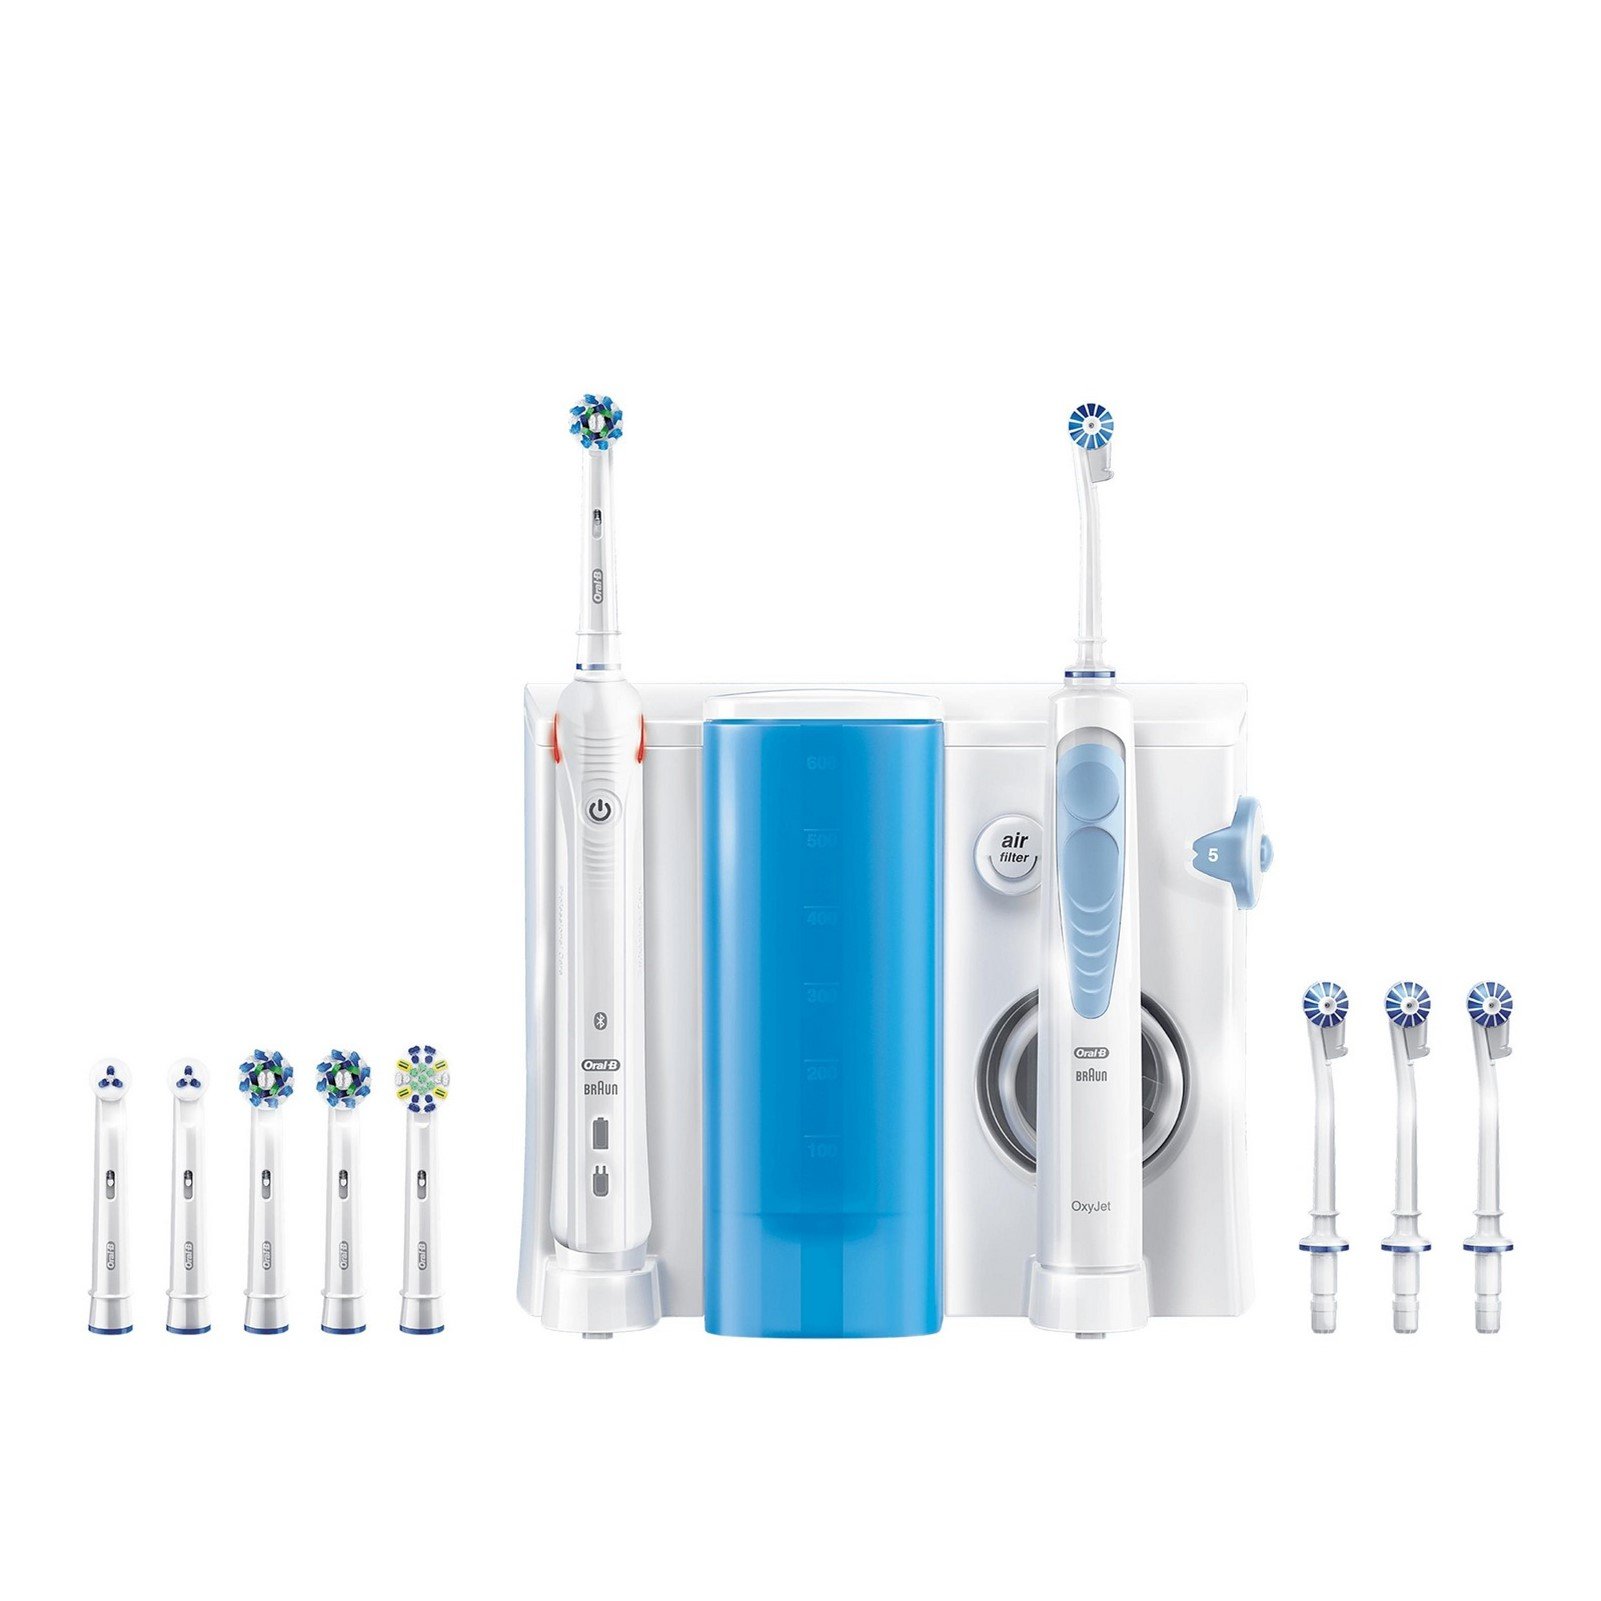 spuiten onderwijzen trimmen Buy Oral-B Oxyjet Cleaning System + Smart 5000 Electric Toothbrush · USA